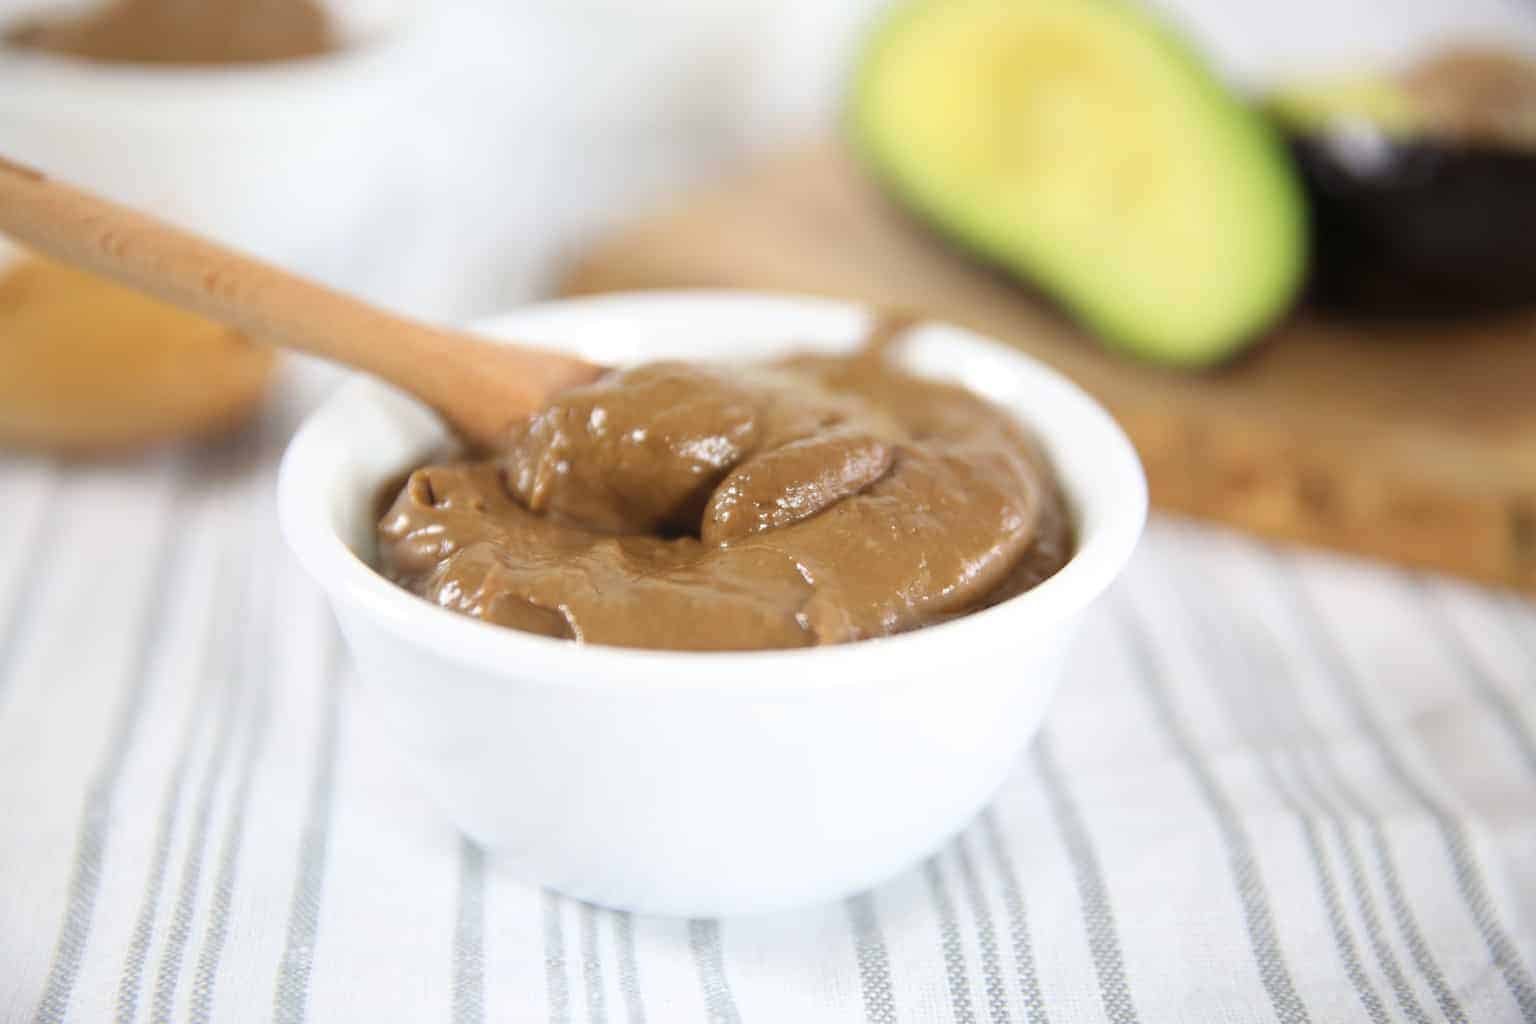 Chocolate avocado pudding in white bool on table cloth.